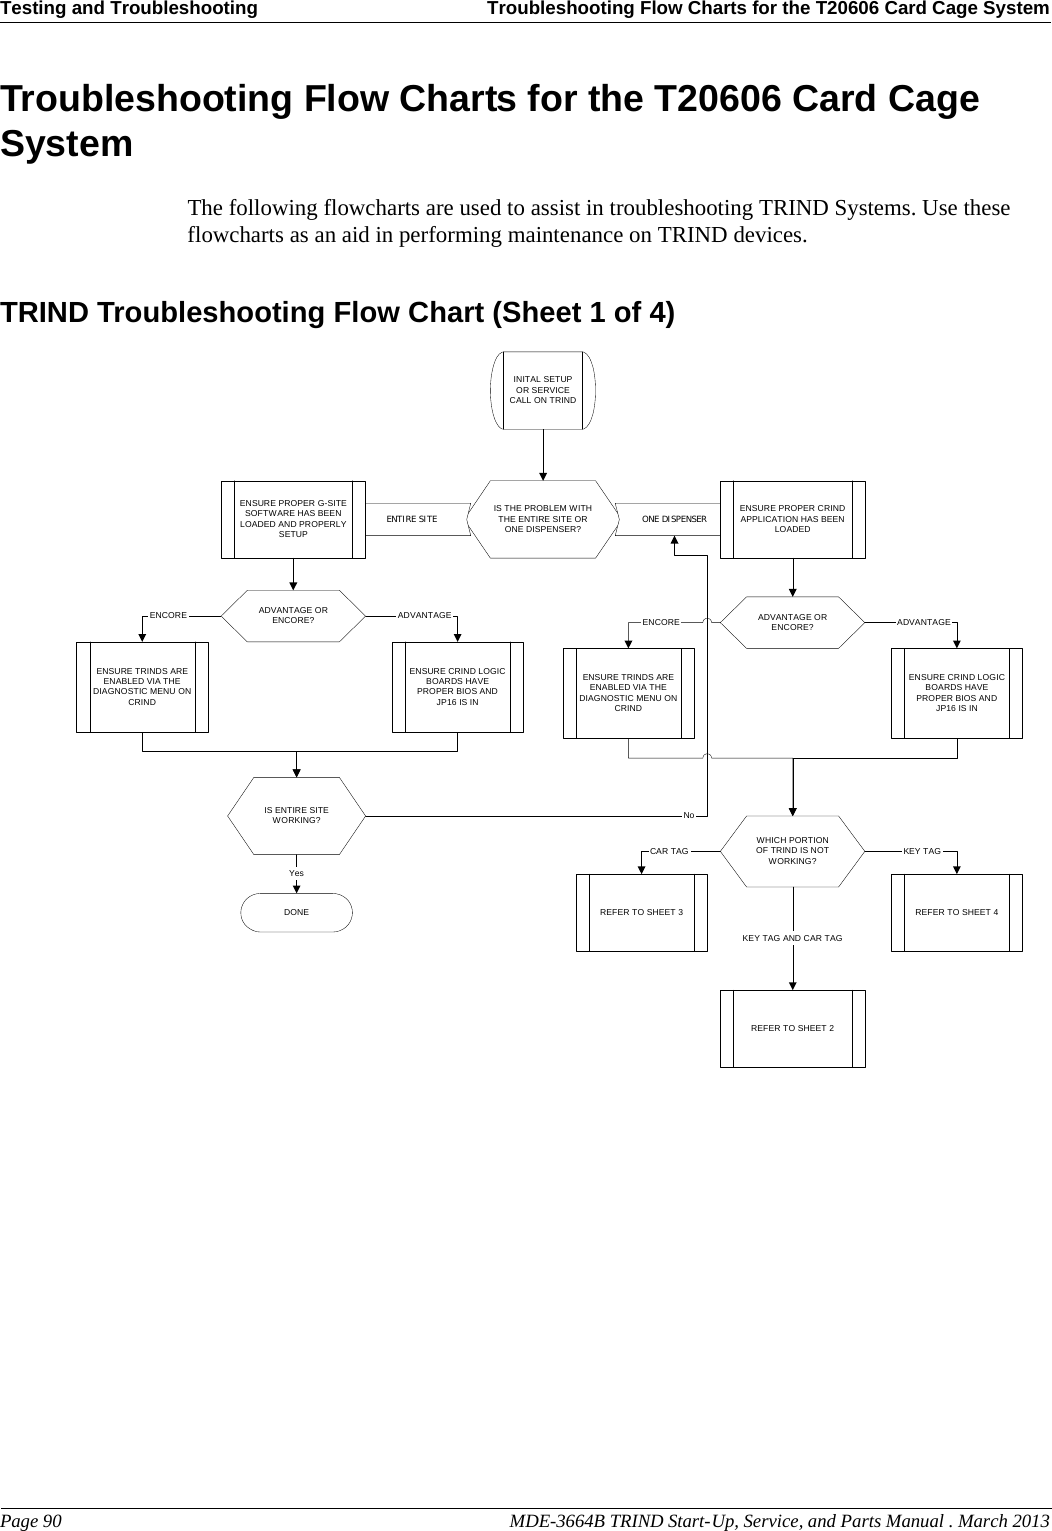 Testing and Troubleshooting Troubleshooting Flow Charts for the T20606 Card Cage SystemPage 90                                                                                                  MDE-3664B TRIND Start-Up, Service, and Parts Manual . March 2013PreliminaryTroubleshooting Flow Charts for the T20606 Card Cage SystemThe following flowcharts are used to assist in troubleshooting TRIND Systems. Use these flowcharts as an aid in performing maintenance on TRIND devices.TRIND Troubleshooting Flow Chart (Sheet 1 of 4)INITAL SETUPOR SERVICECALL ON TRINDIS THE PROBLEM WITHTHE ENTIRE SITE ORONE DISPENSER?ENTIRE SITE ONE DISPENSERADVANTAGE ORENCORE?ENSURE CRIND LOGICBOARDS HAVEPROPER BIOS ANDJP16 IS INENSURE TRINDS AREENABLED VIA THEDIAGNOSTIC MENU ONCRINDENSURE PROPER G-SITESOFTWARE HAS BEENLOADED AND PROPERLYSETUPENCORE ADVANTAGE ADVANTAGE ORENCORE?ENSURE CRIND LOGICBOARDS HAVEPROPER BIOS ANDJP16 IS INENSURE TRINDS AREENABLED VIA THEDIAGNOSTIC MENU ONCRINDENCORE ADVANTAGEWHICH PORTIONOF TRIND IS NOTWORKING?IS ENTIRE SITEWORKING? NoYesDONEENSURE PROPER CRINDAPPLICATION HAS BEENLOADEDKEY TAG AND CAR TAGREFER TO SHEET 3REFER TO SHEET 2REFER TO SHEET 4KEY TAGCAR TAG